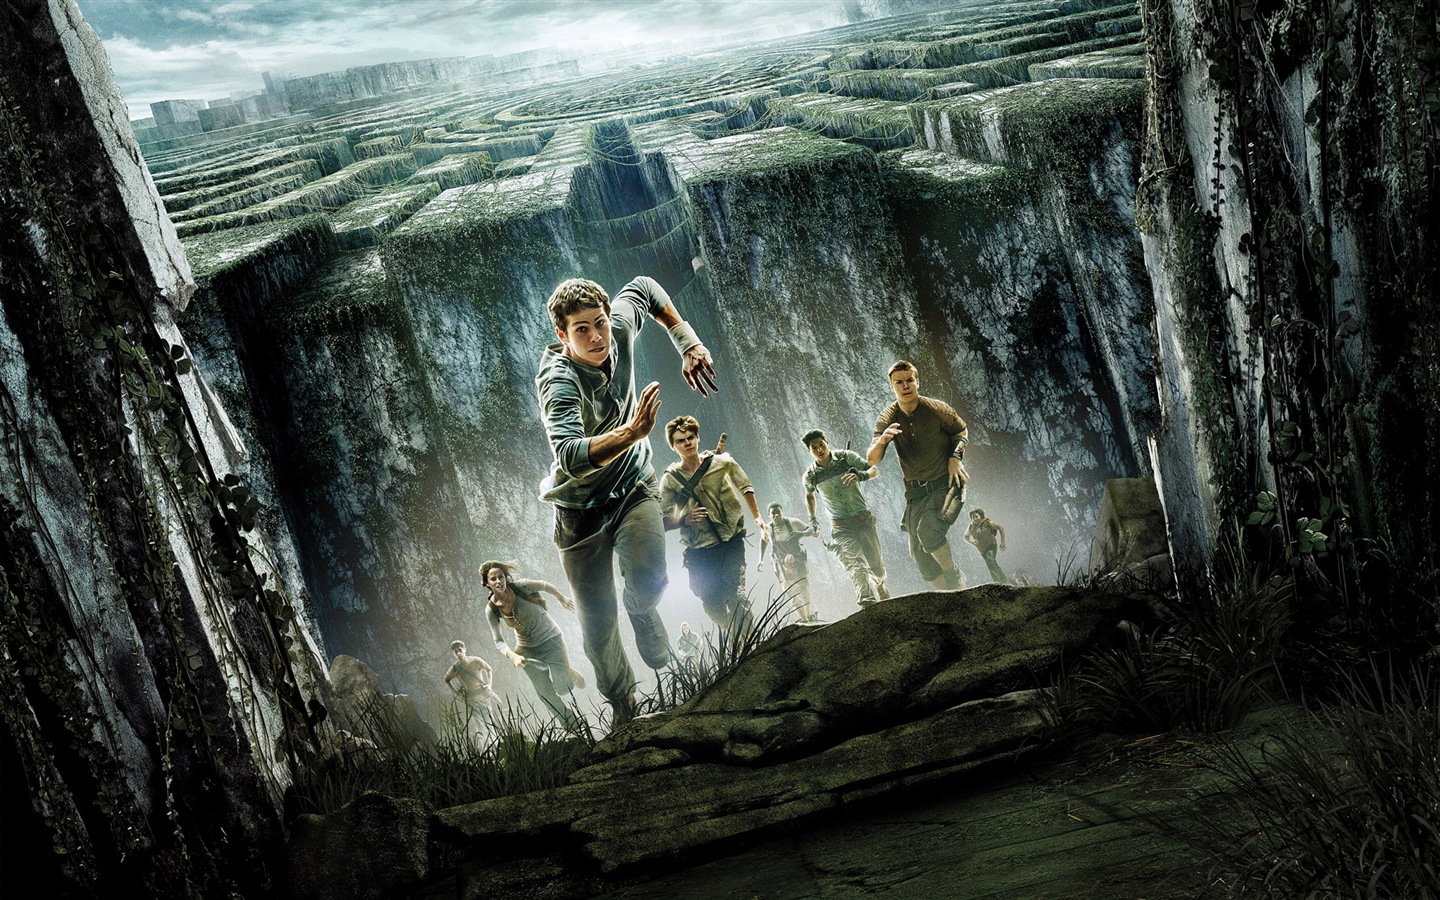 The Maze Runner HD movie wallpapers #6 - 1440x900